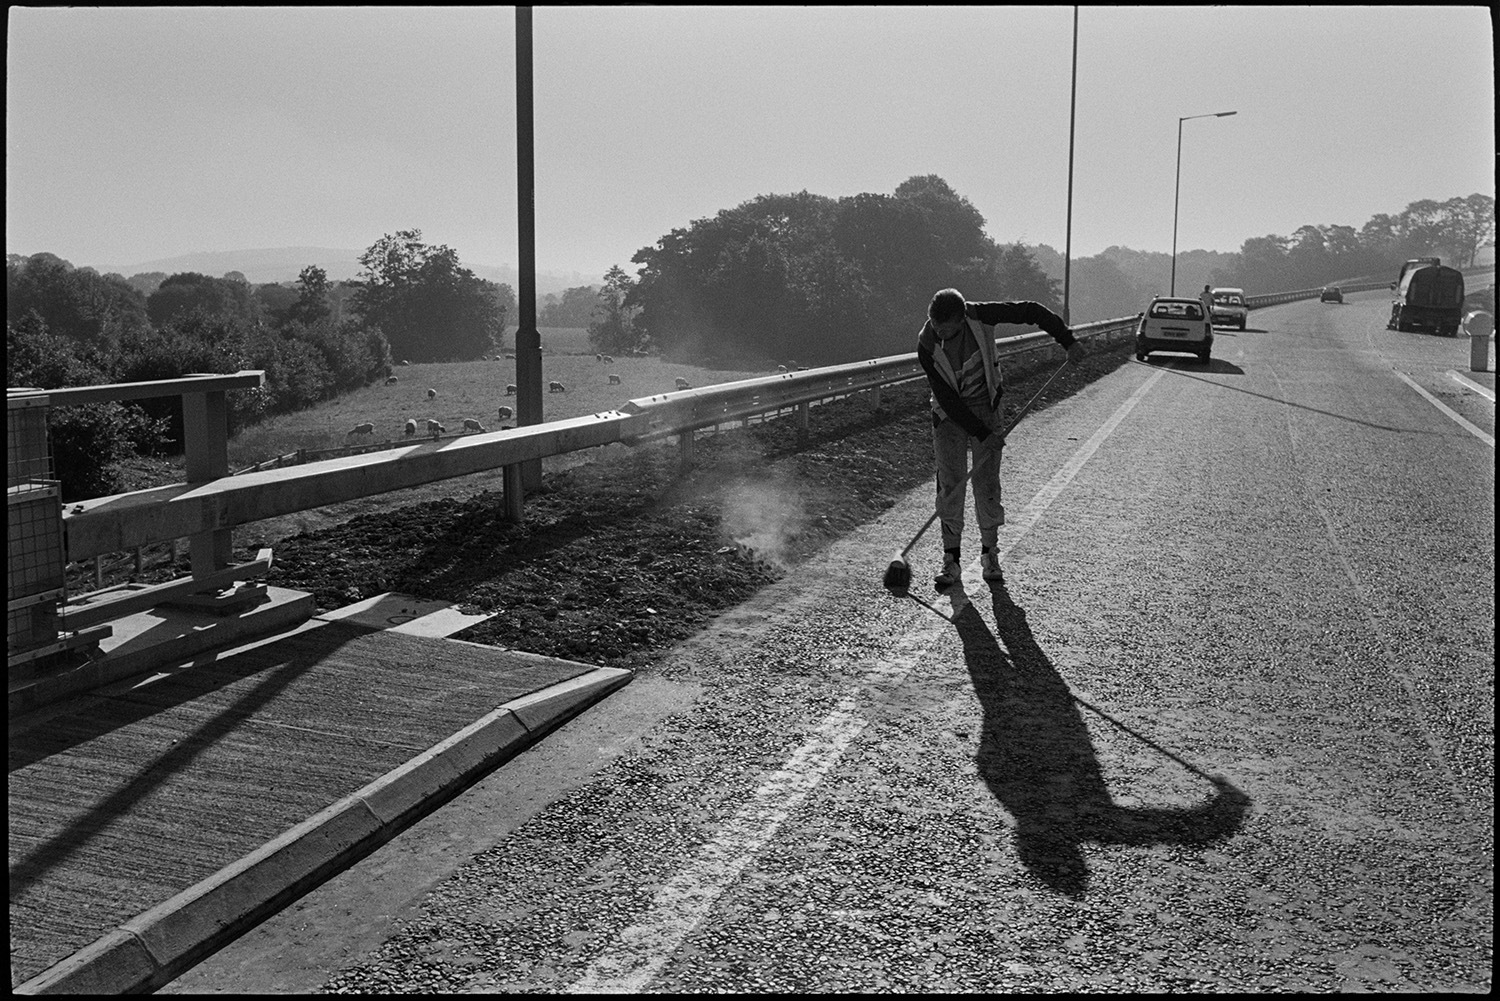 Men sweeping new link road before official opening.
[A man sweeping the A361 North Devon Link Road near South Molton before the official opening. Vehicles ca be seen on the road and in the background and a flock of sheep are grazing in a field adjacent to the road.]